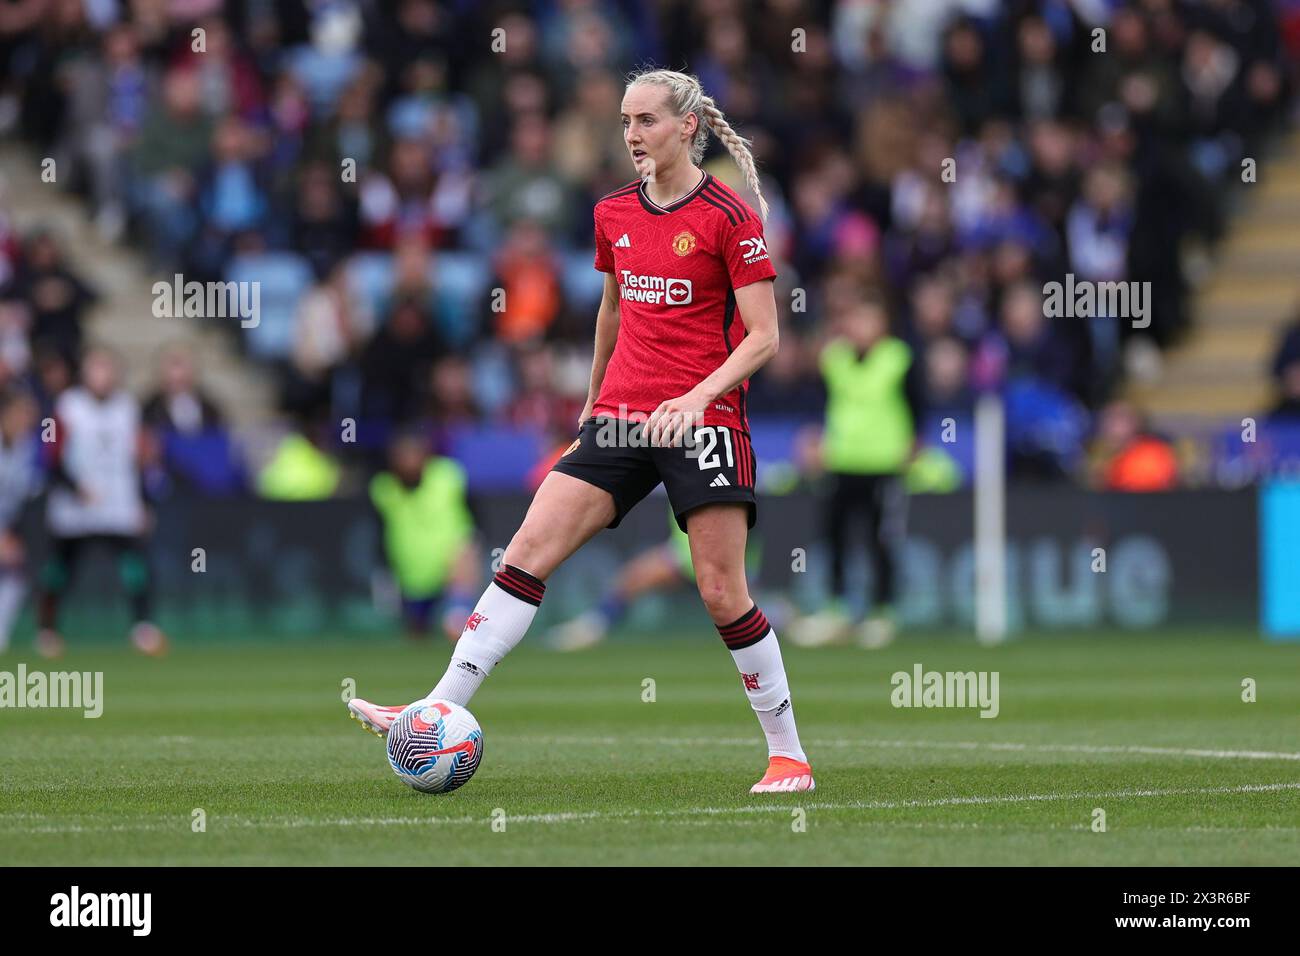 King Power Stadium, Leicester on Sunday 28th April 2024. Millie Turner of Manchester United during the Barclays WomenÕs Super League match between Leicester City and Manchester United at the King Power Stadium, Leicester on Sunday 28th April 2024. (Credit: James Holyoak / Alamy Live News) Stock Photo